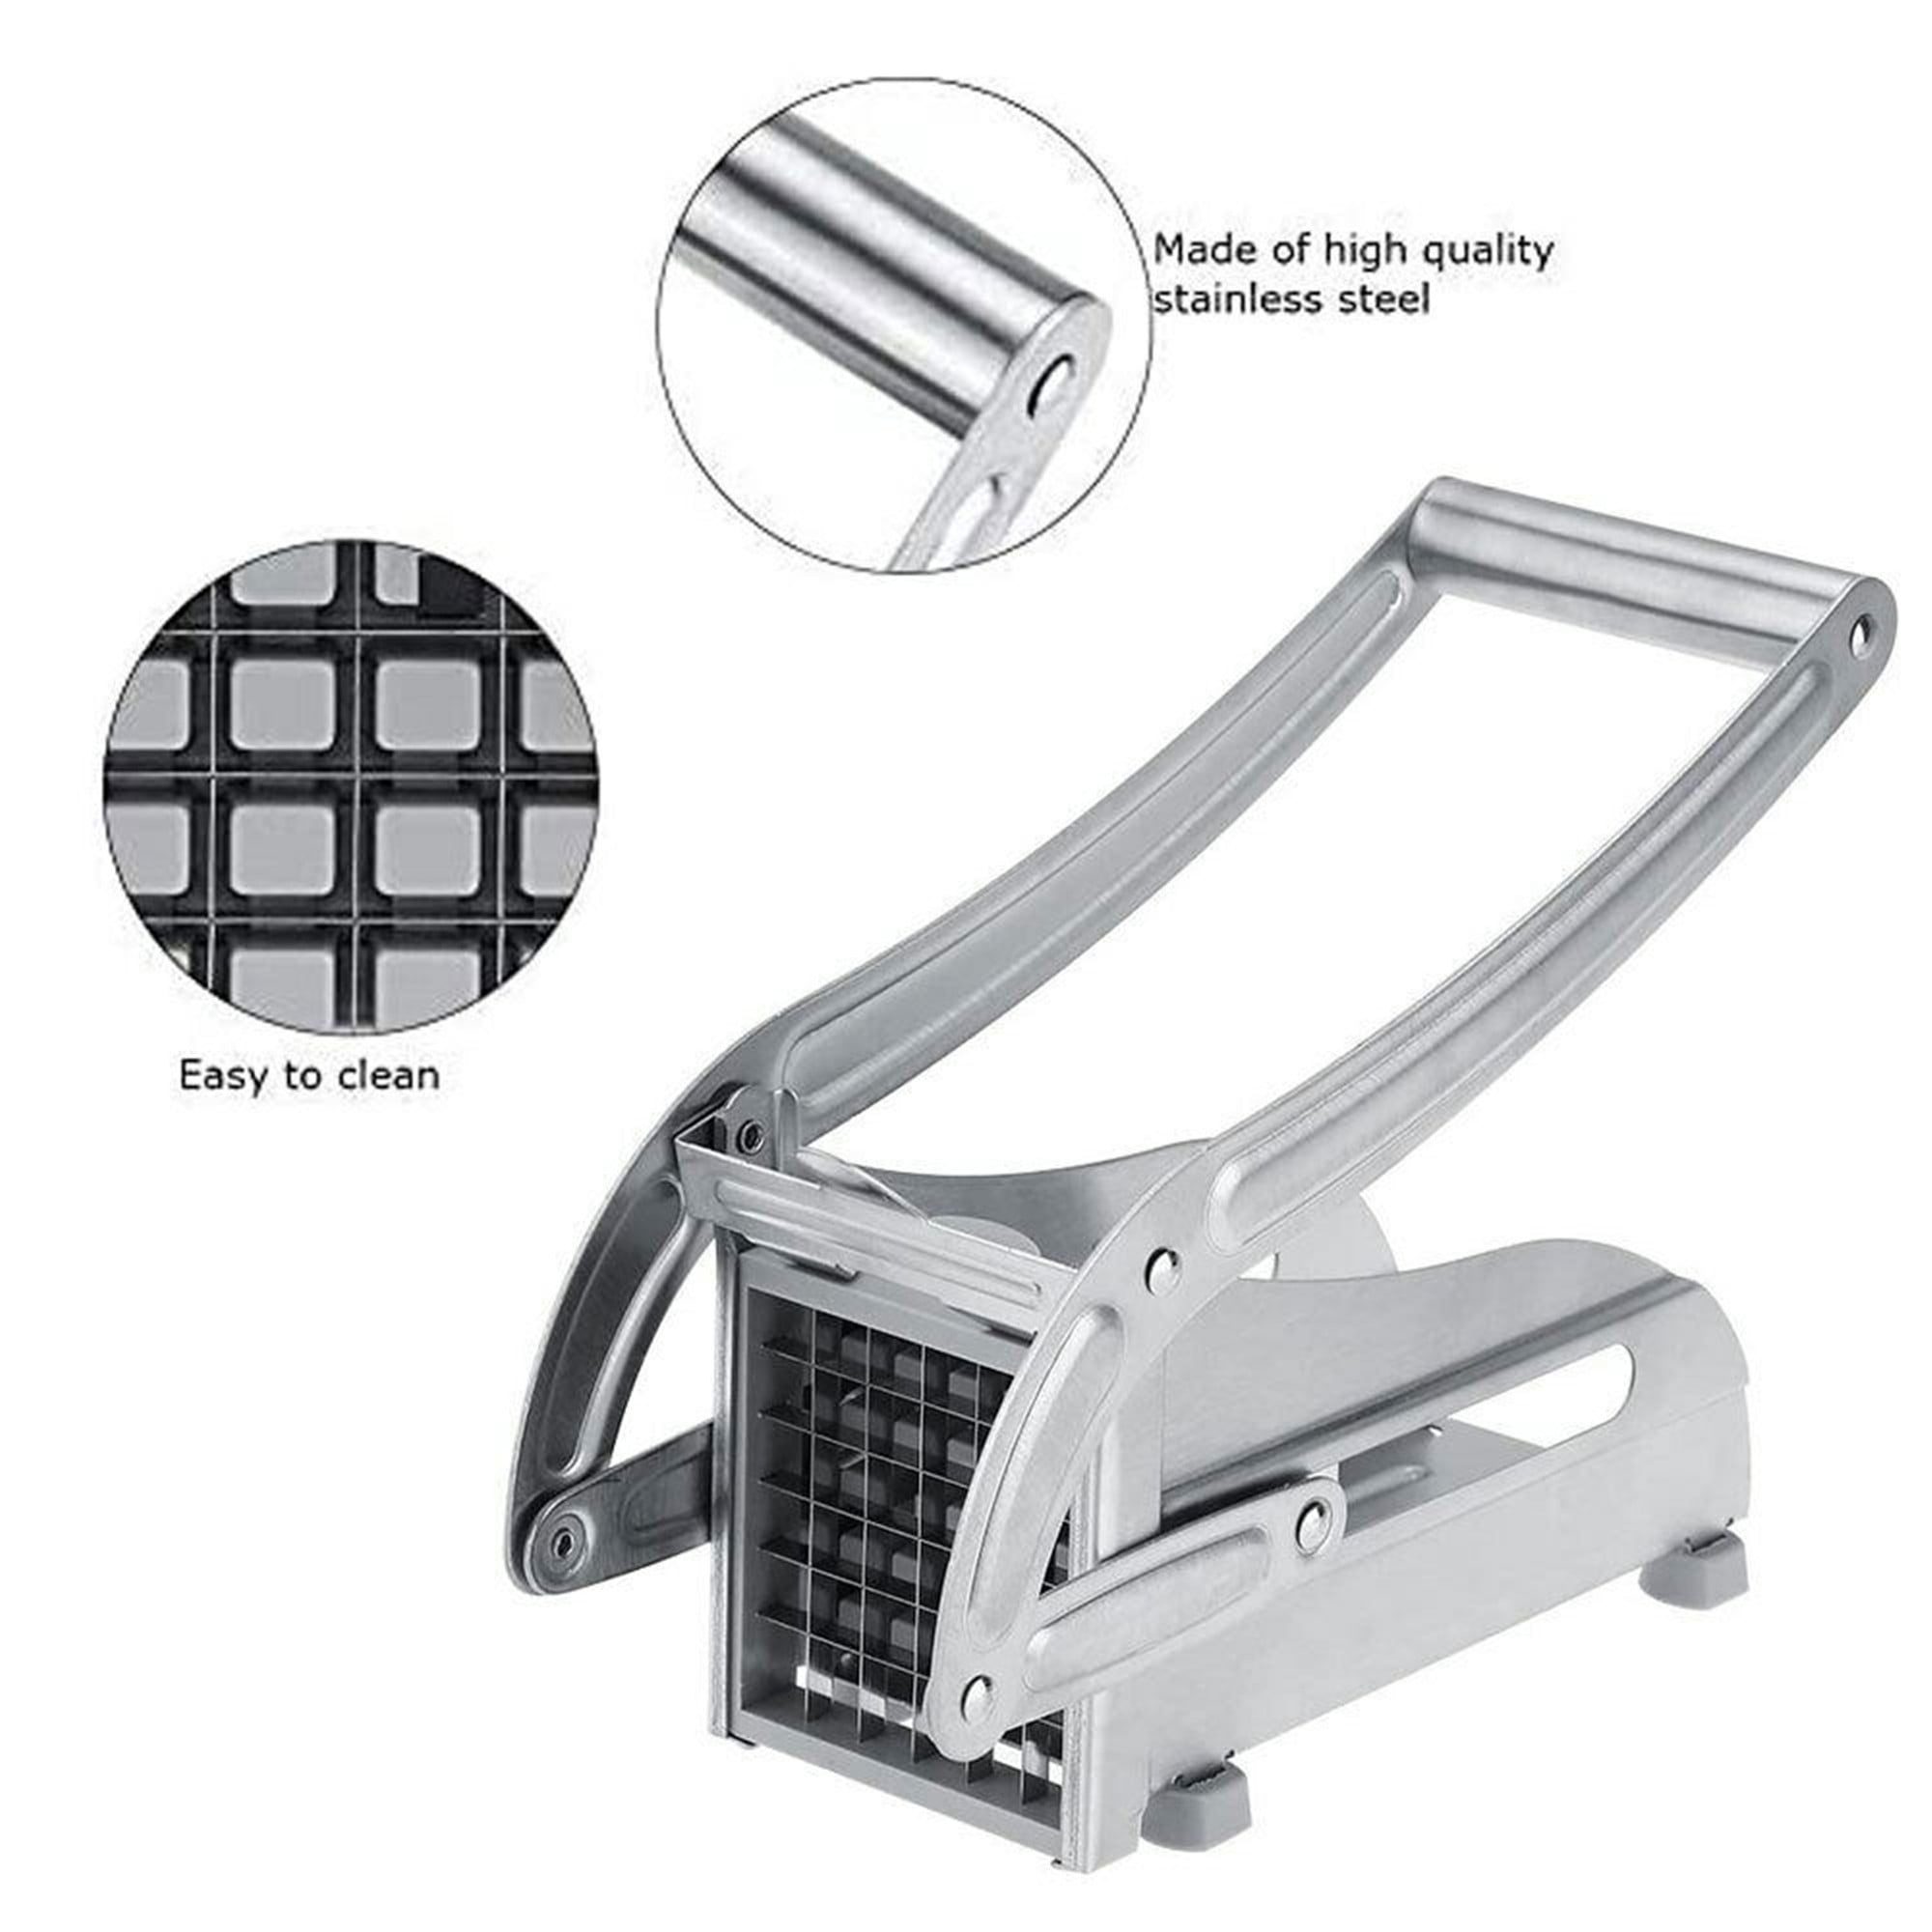  French Fry Cutter Potato Slicer LSOFNRB Stainless Steel Potato  Cutter, French Fries Cutter Includes 2 Blade Size and No-Slip Suction Base,  Easy to Clean, For Air Fryer Food, Vegetable Cutter: Home